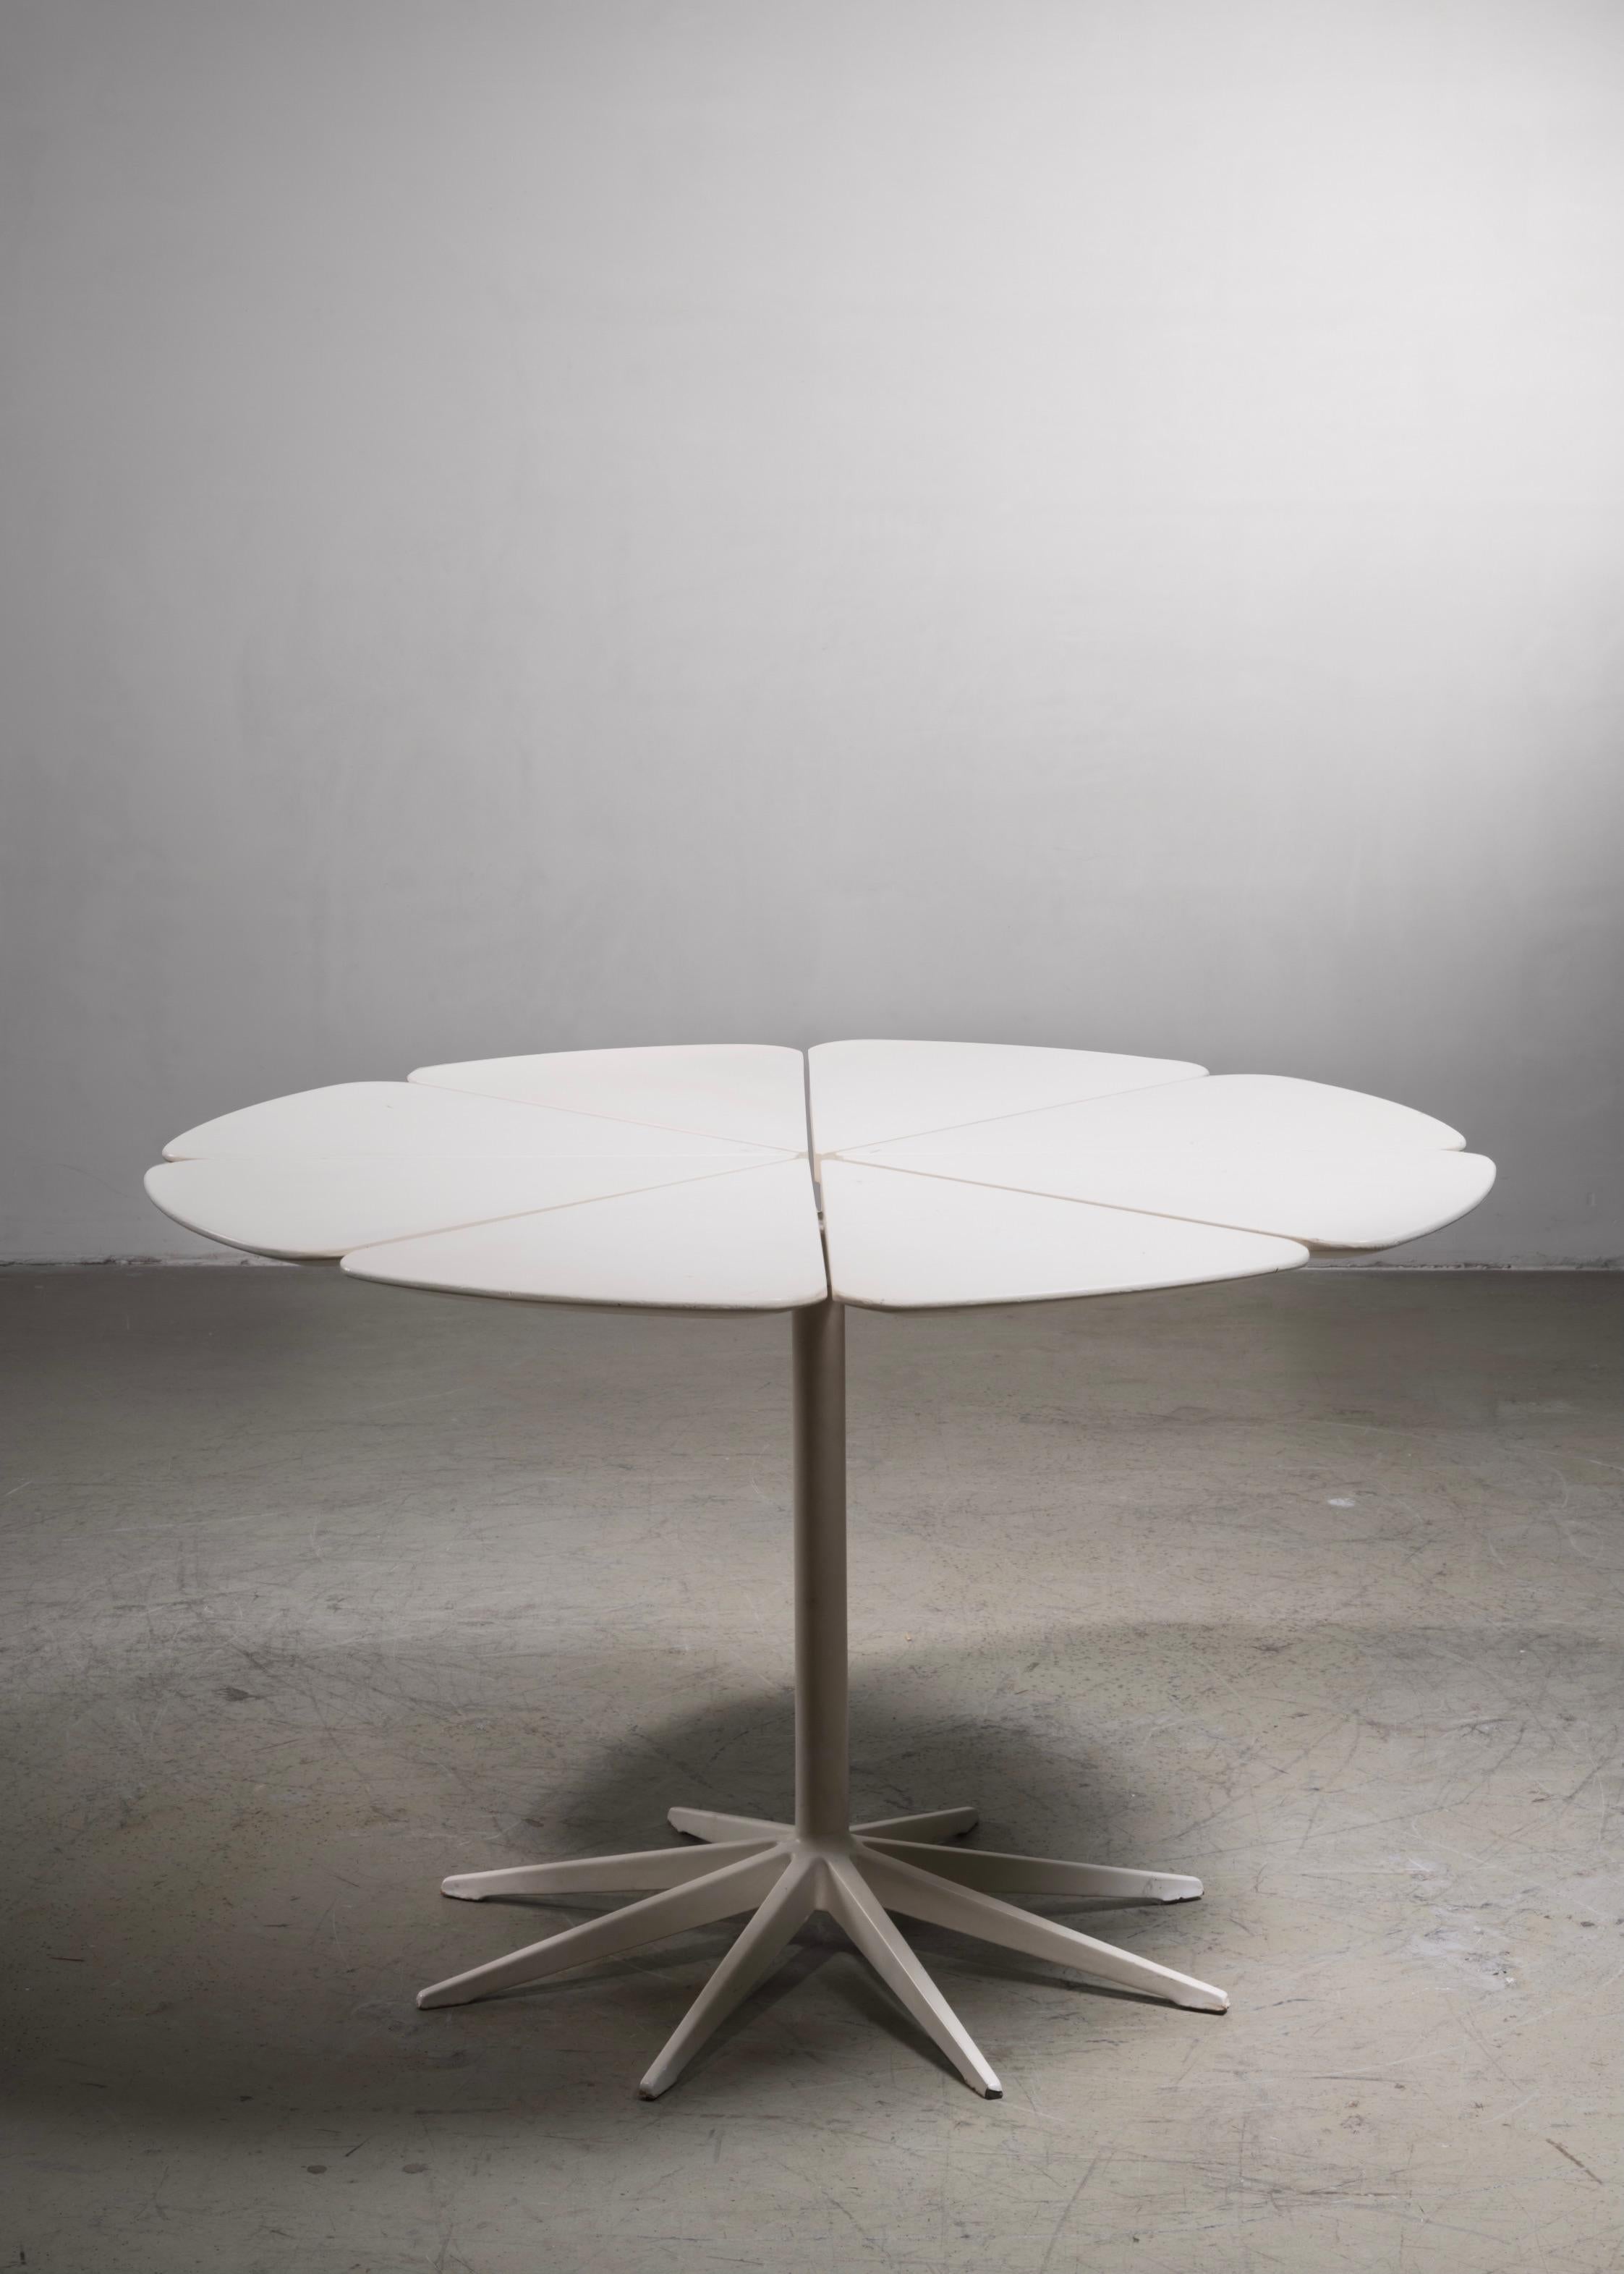 American Richard Schultz Petal Dining Table in White for Knoll, USA, 1960s For Sale